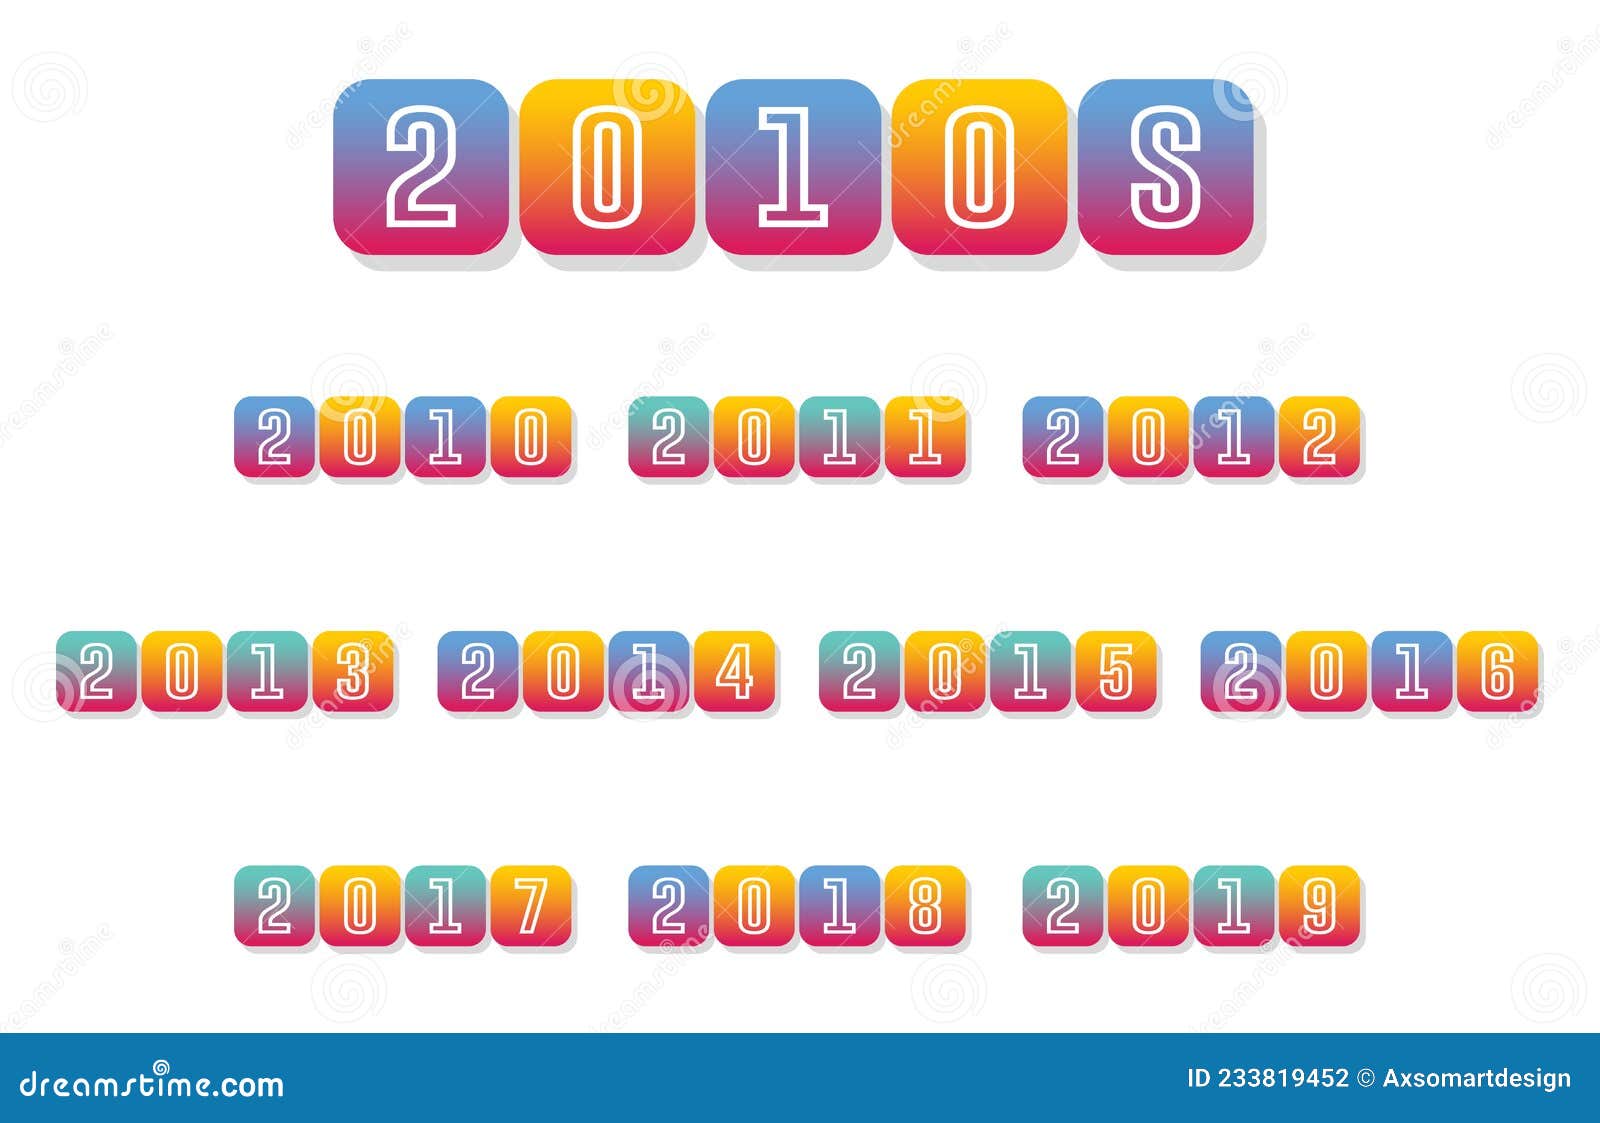 2010s year labels | millennial graphics | timeline clipart and calendar headers | reunion banners | app styled icons